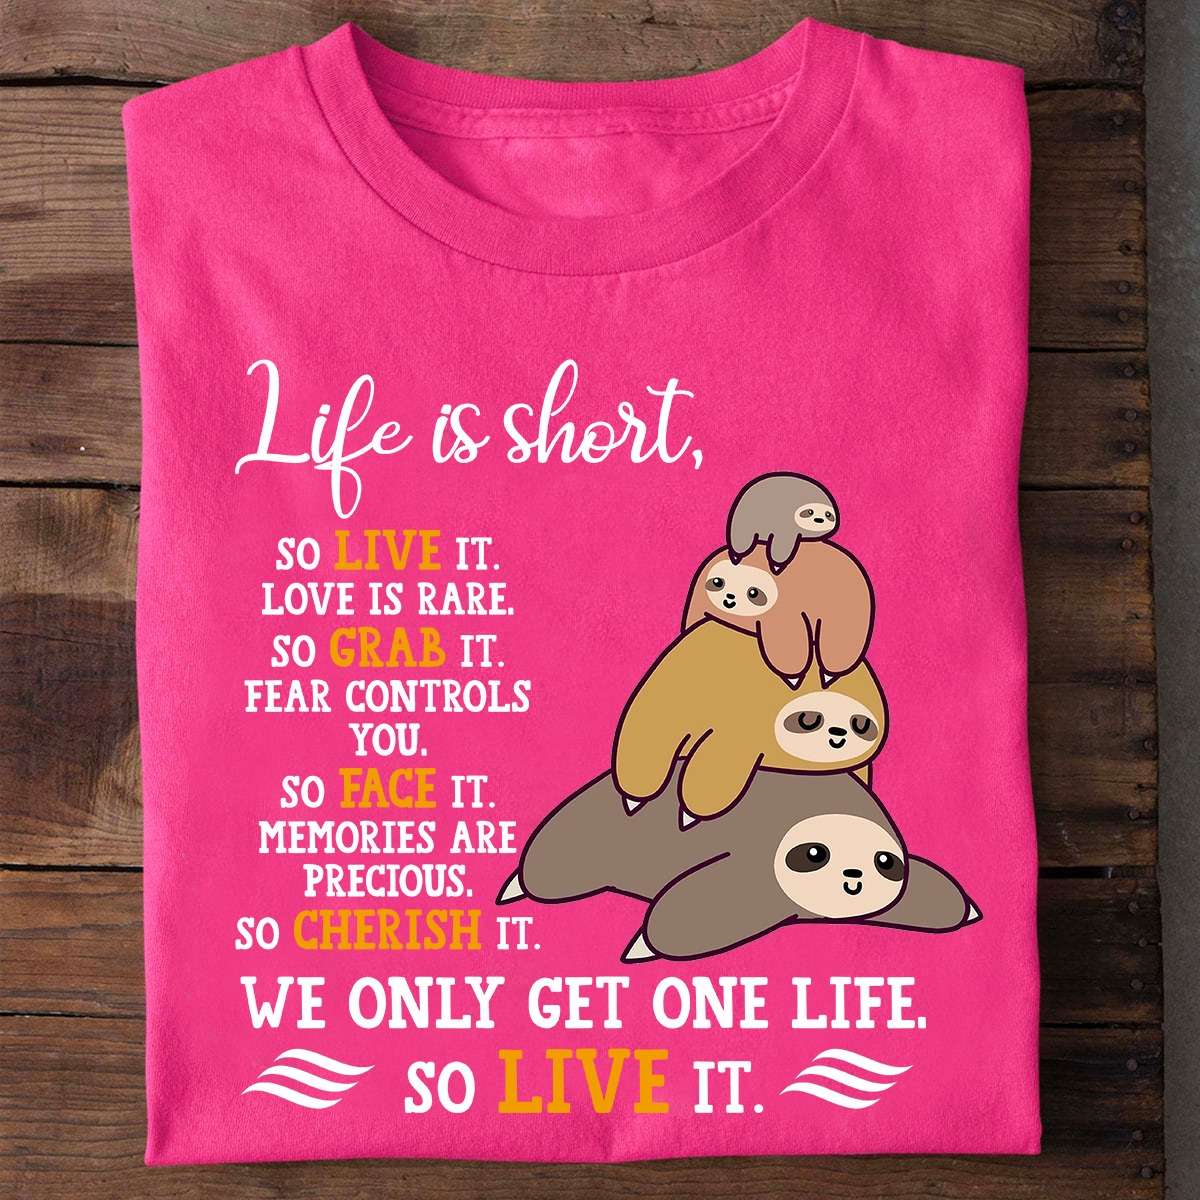 Life is short, so live it, love is rare so grab it - Sloth family, sloth lover